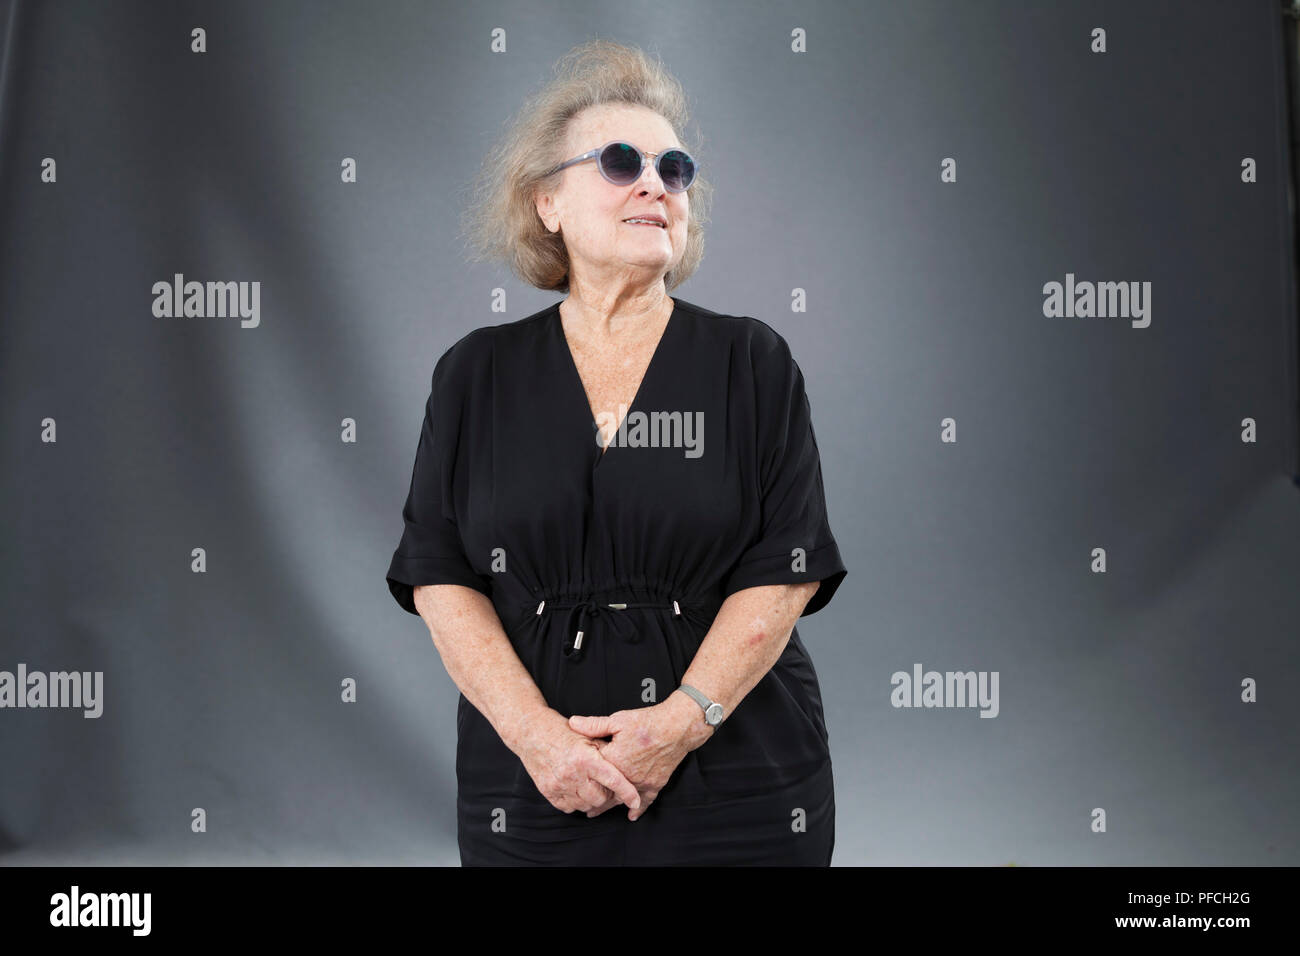 Edinburgh, UK. 21st August, 2018. Lyndall Gordon is a British-based South African born academic writer, known for her literary biographies. Pictured at the Edinburgh International Book Festival. Edinburgh, Scotland.  Picture by Gary Doak / Alamy Live News Stock Photo